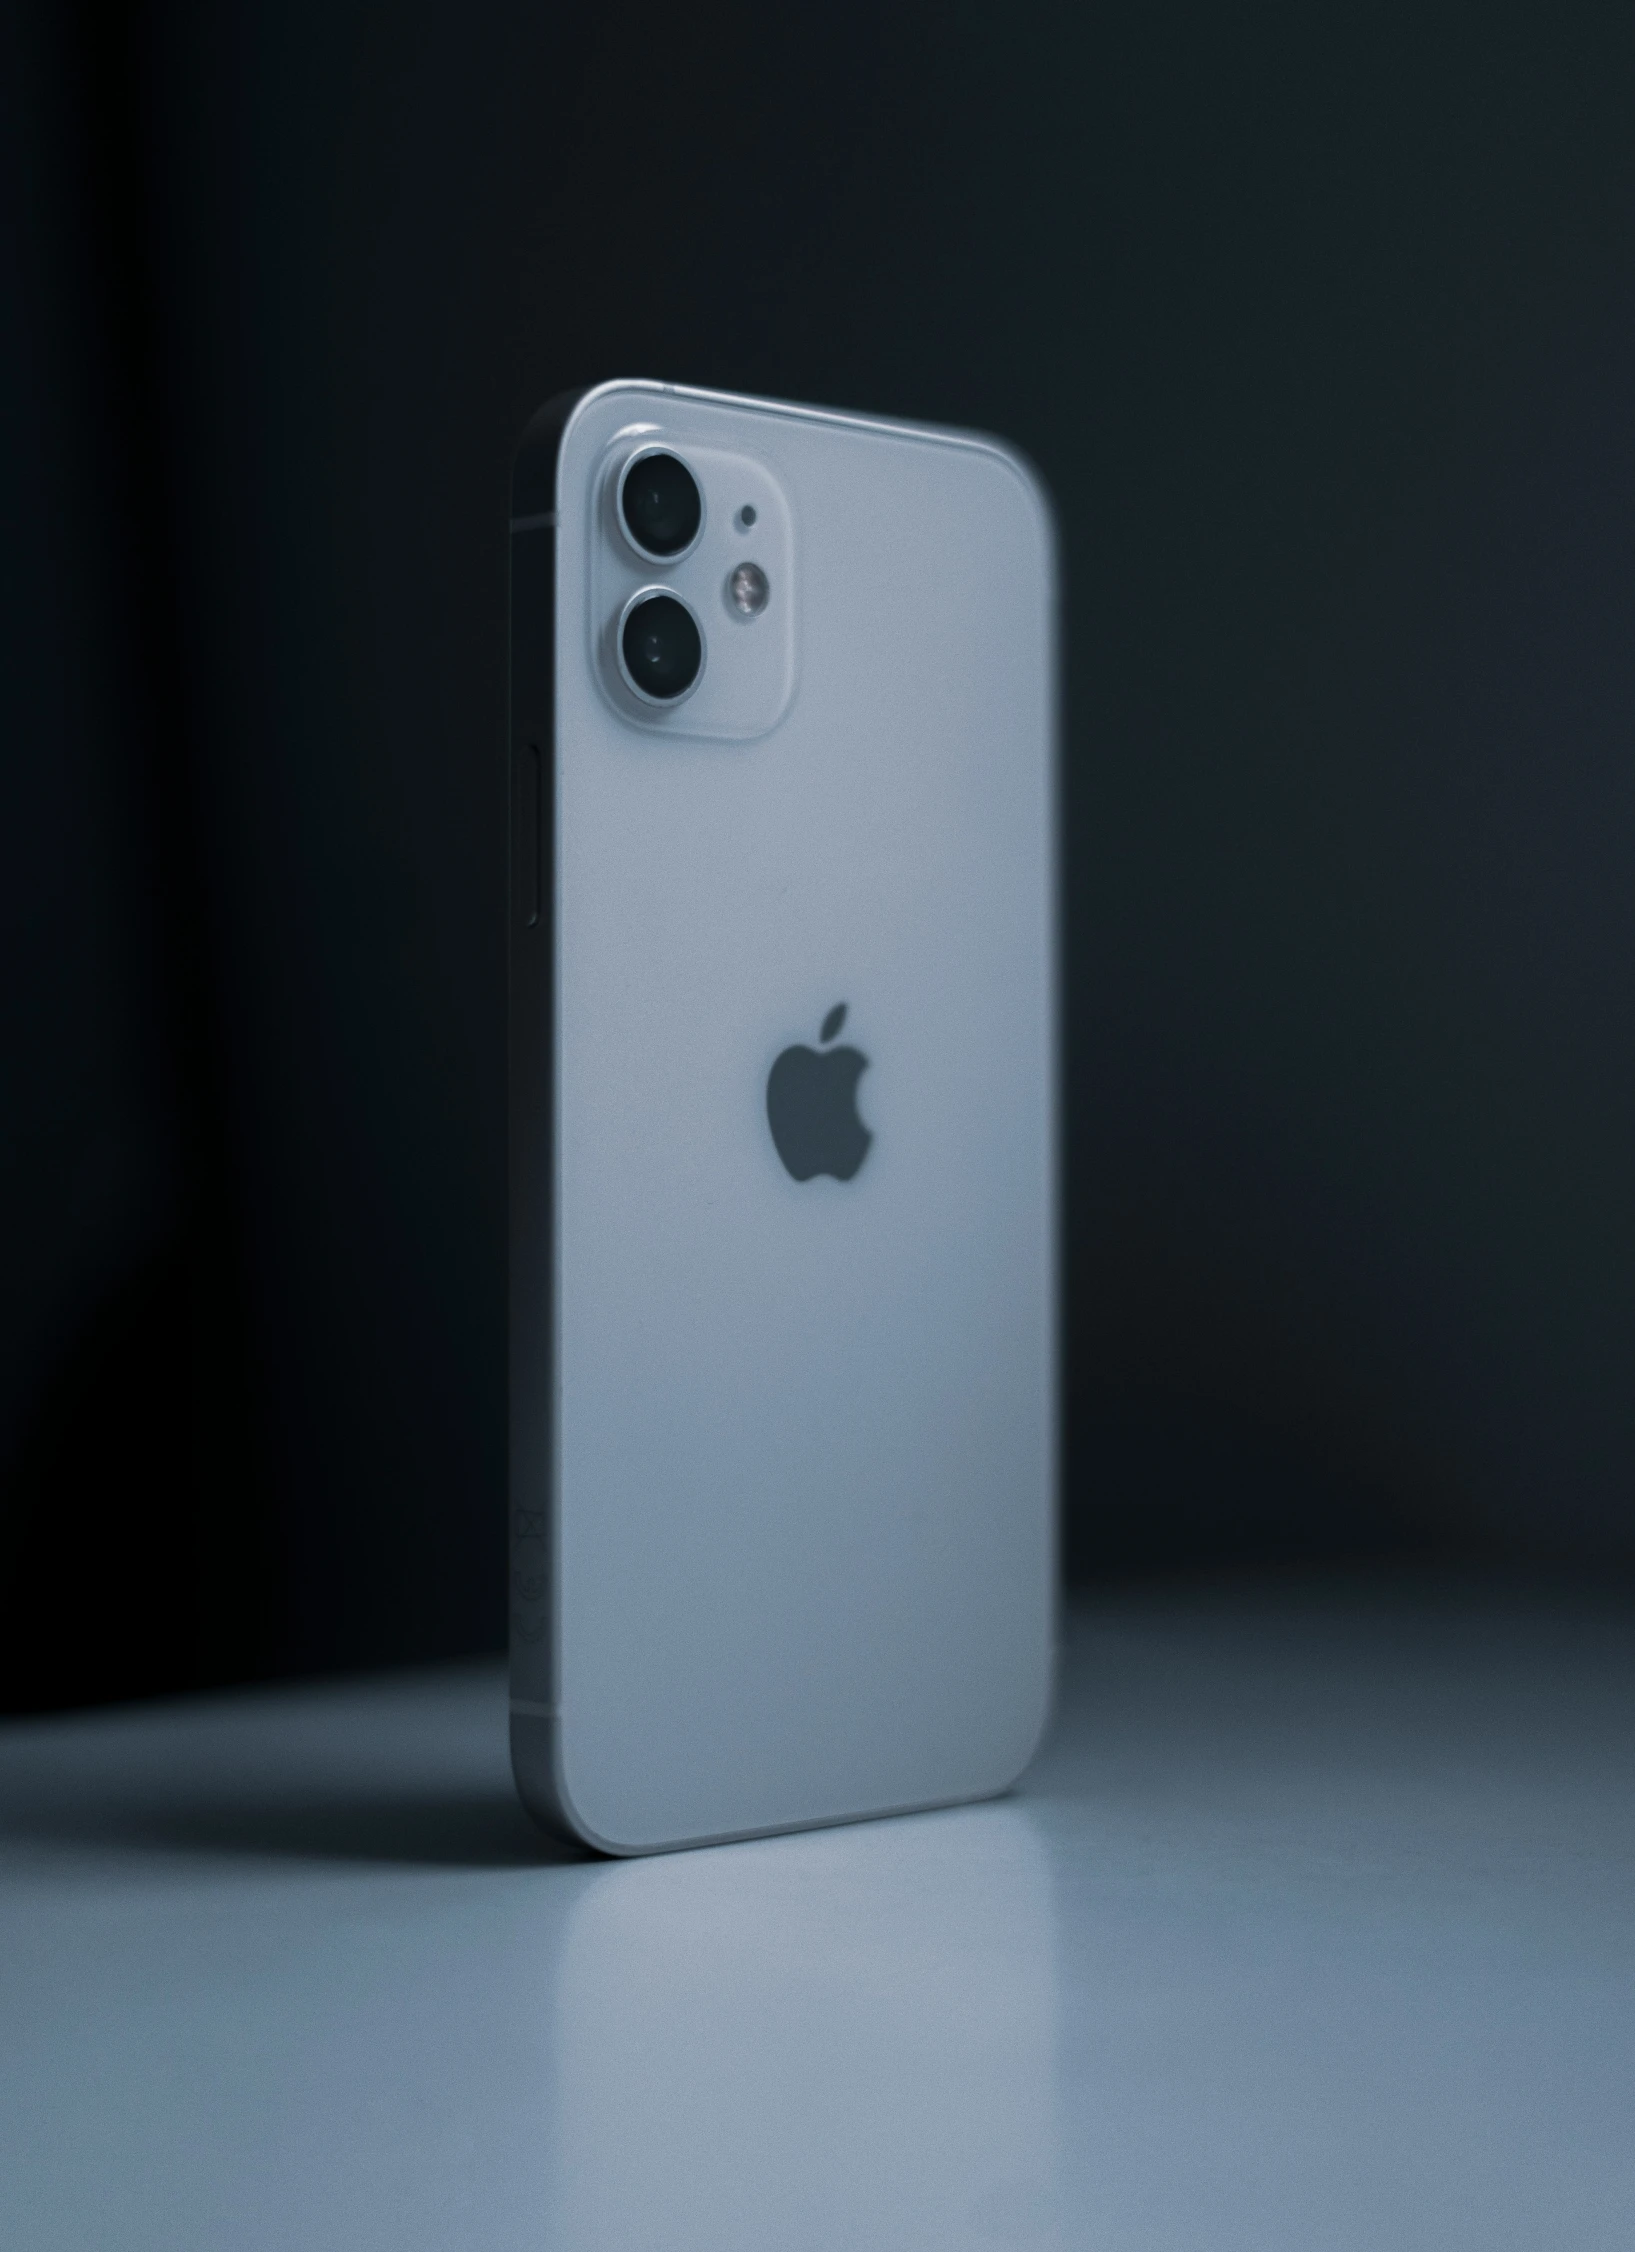 the new iphone 11 is in close proximity to the apple logo